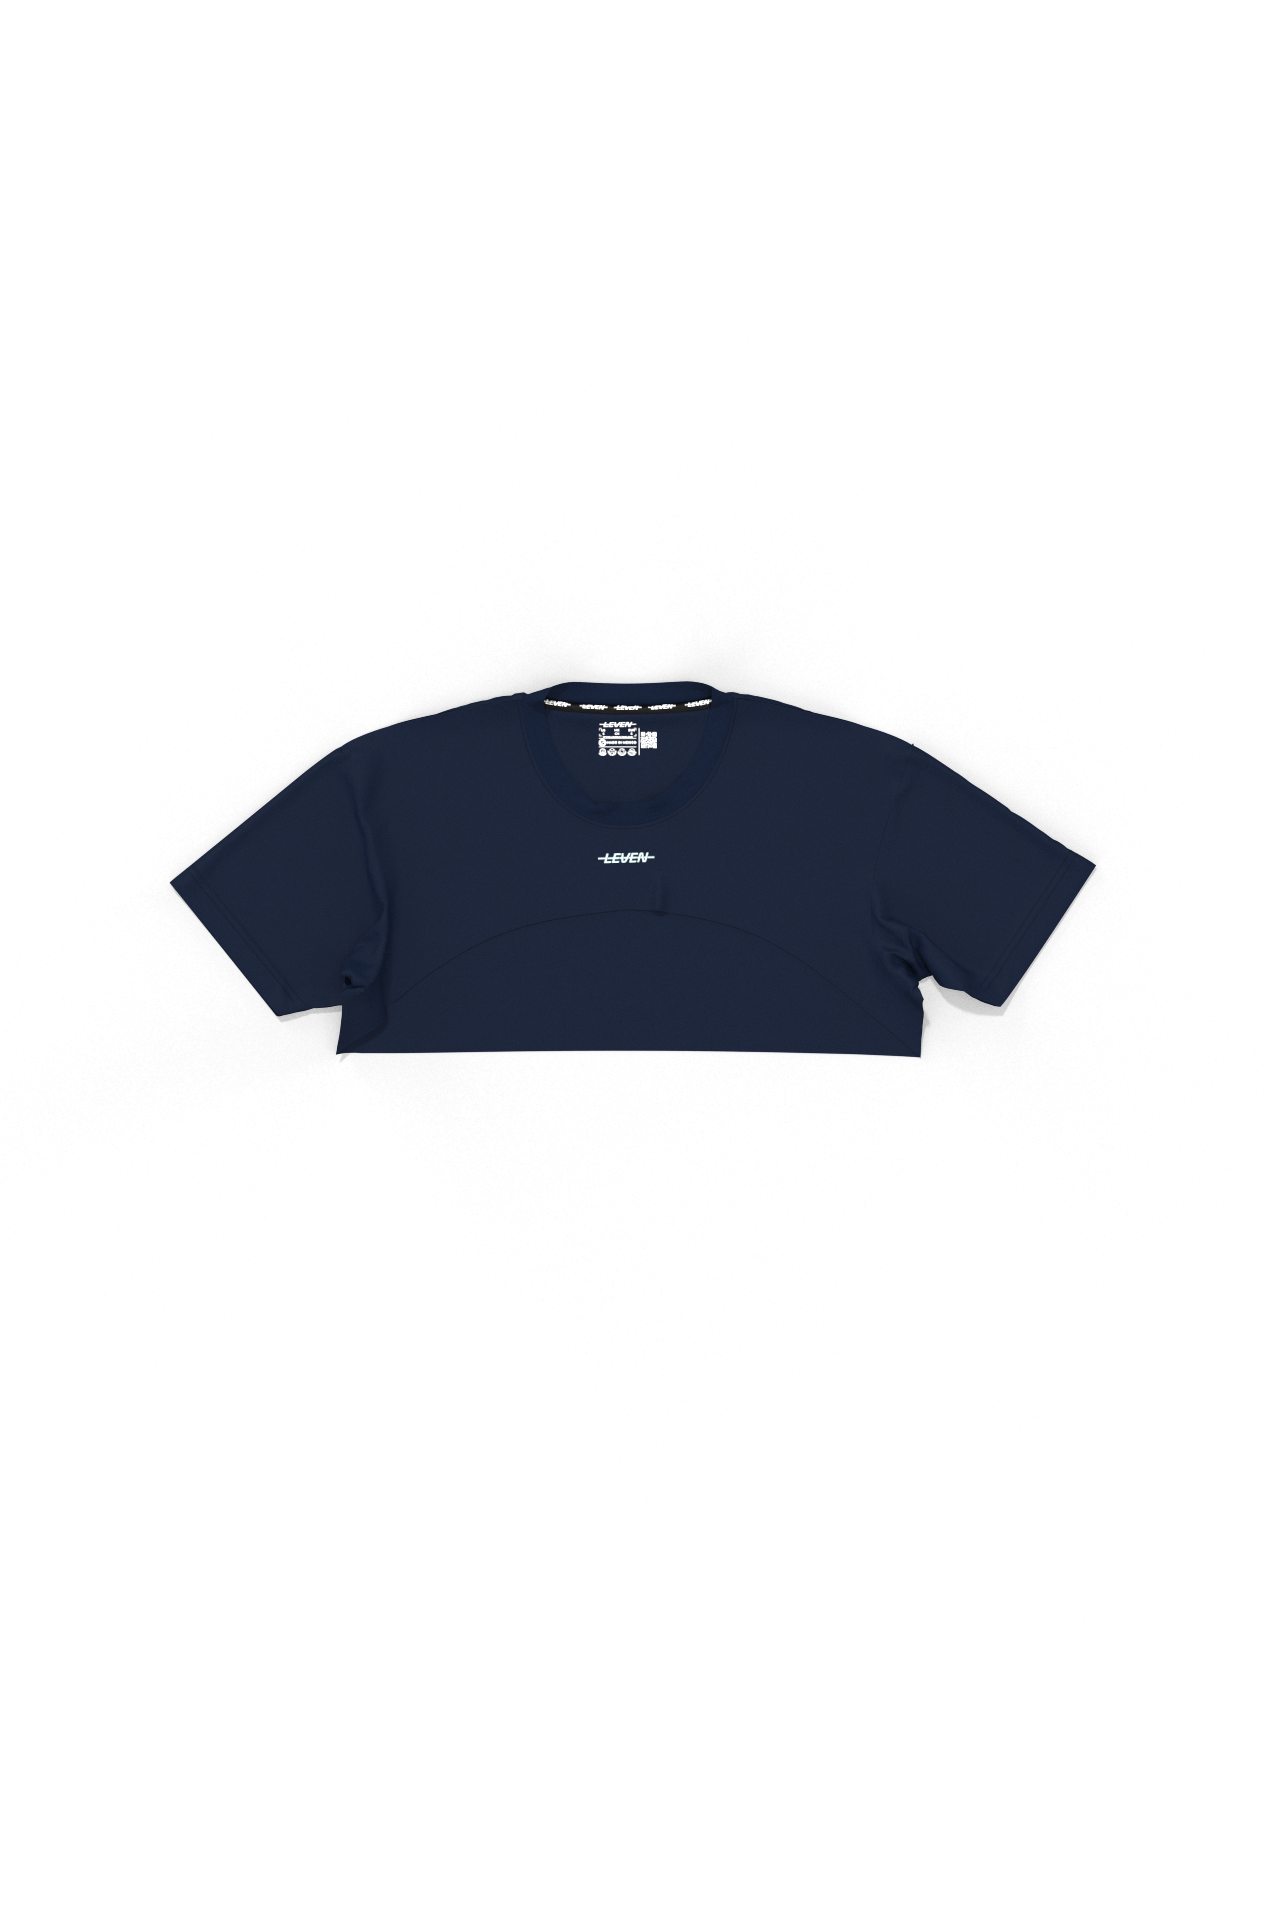 Leven's Ultra Cropped Crop Top Navy